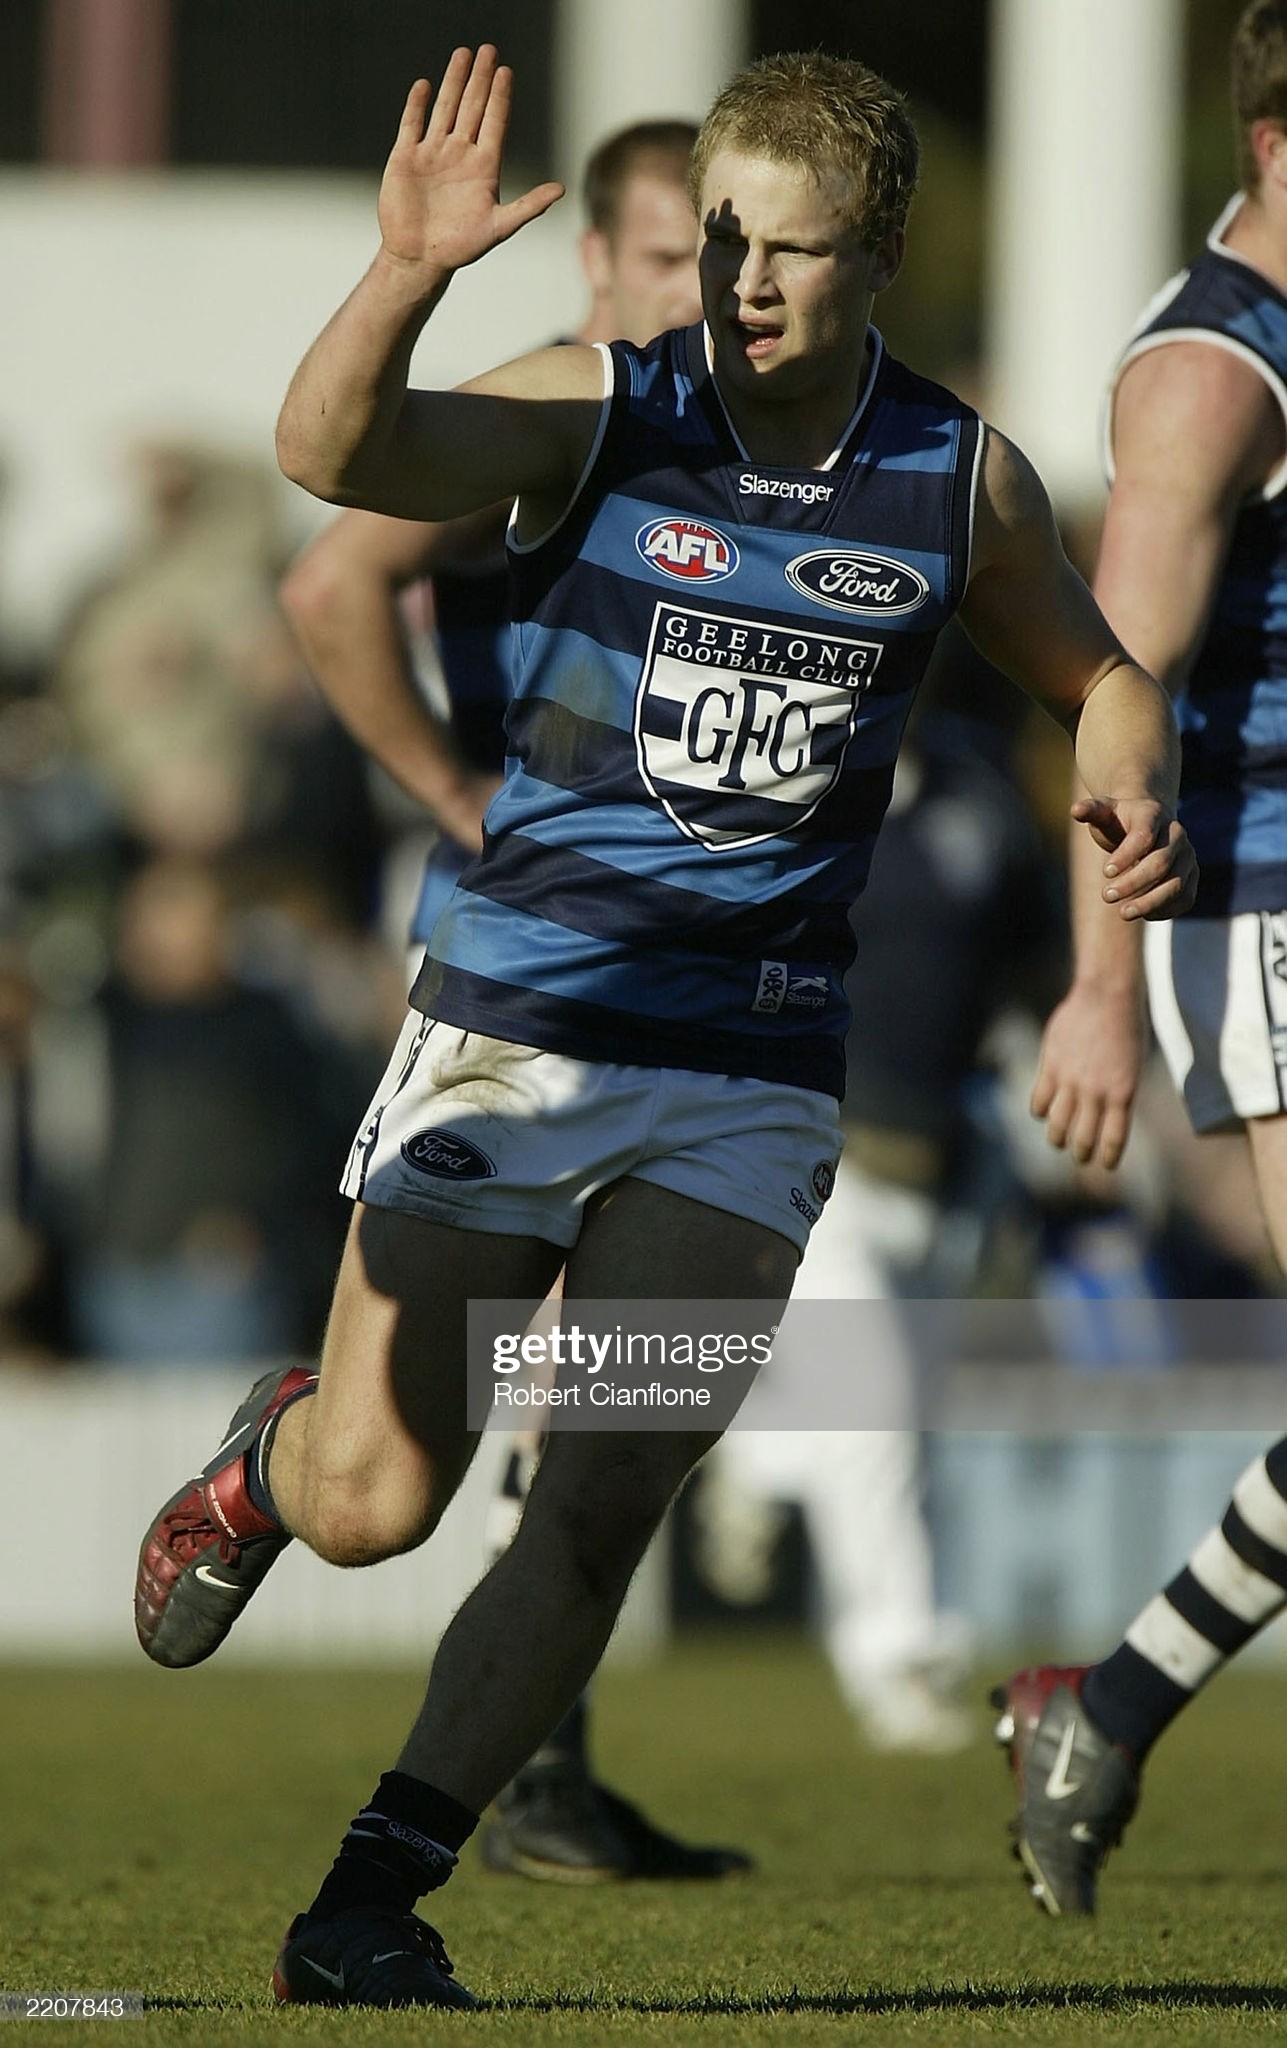 gary-ablett-of-the-cats-celebtares-a-goal-during-the-round-17-afl-picture-id2207843